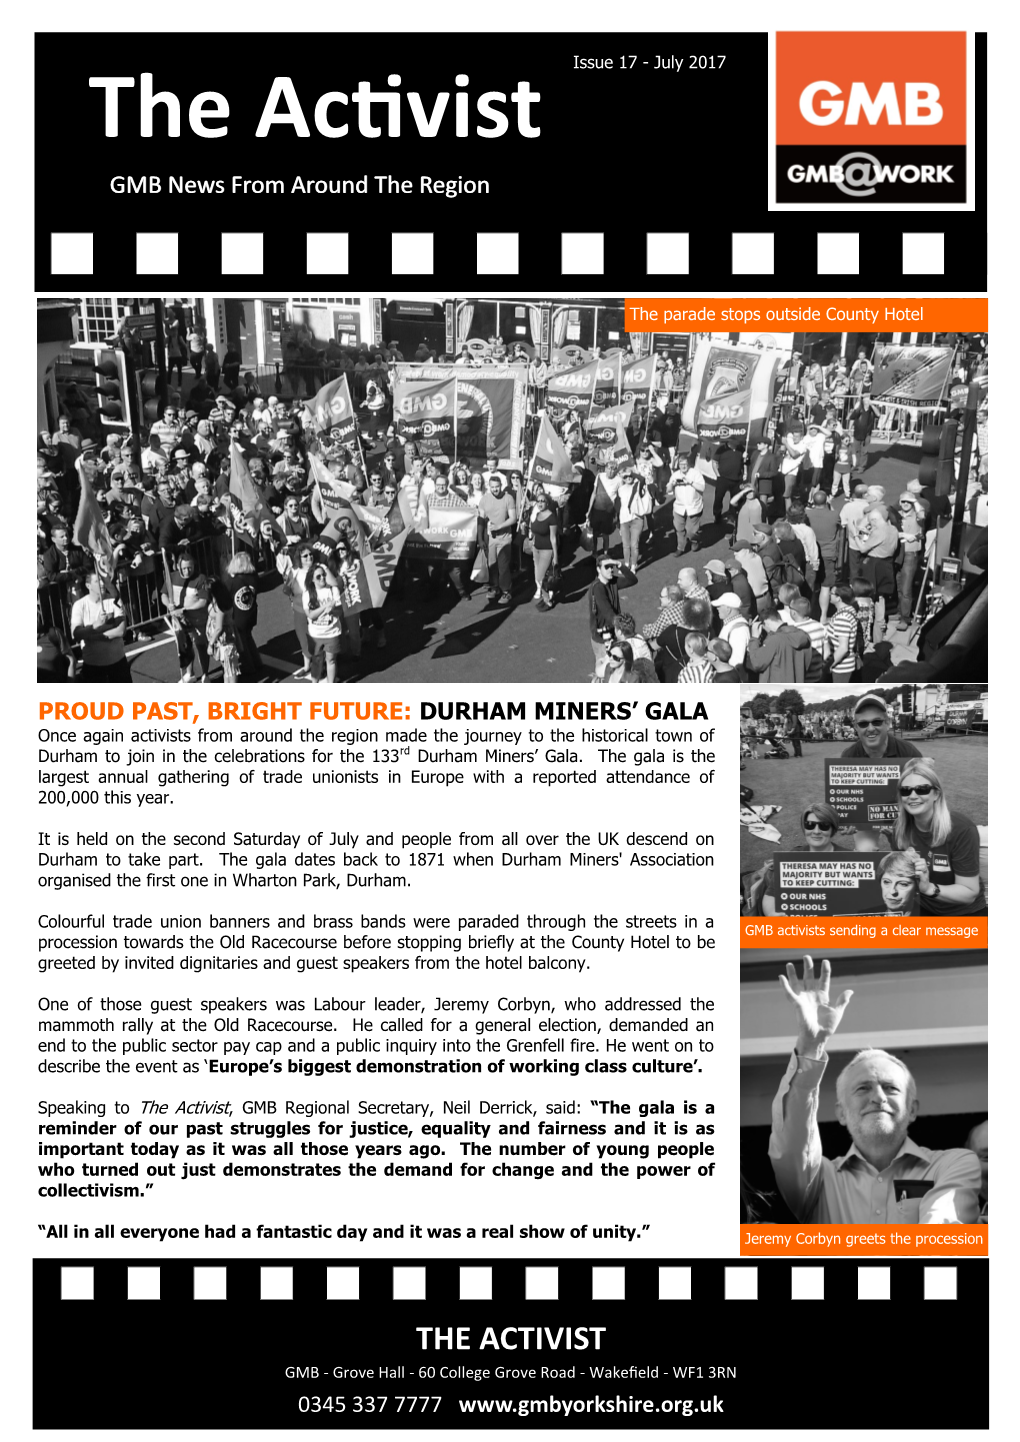 The Activist GMB News from Around the Region